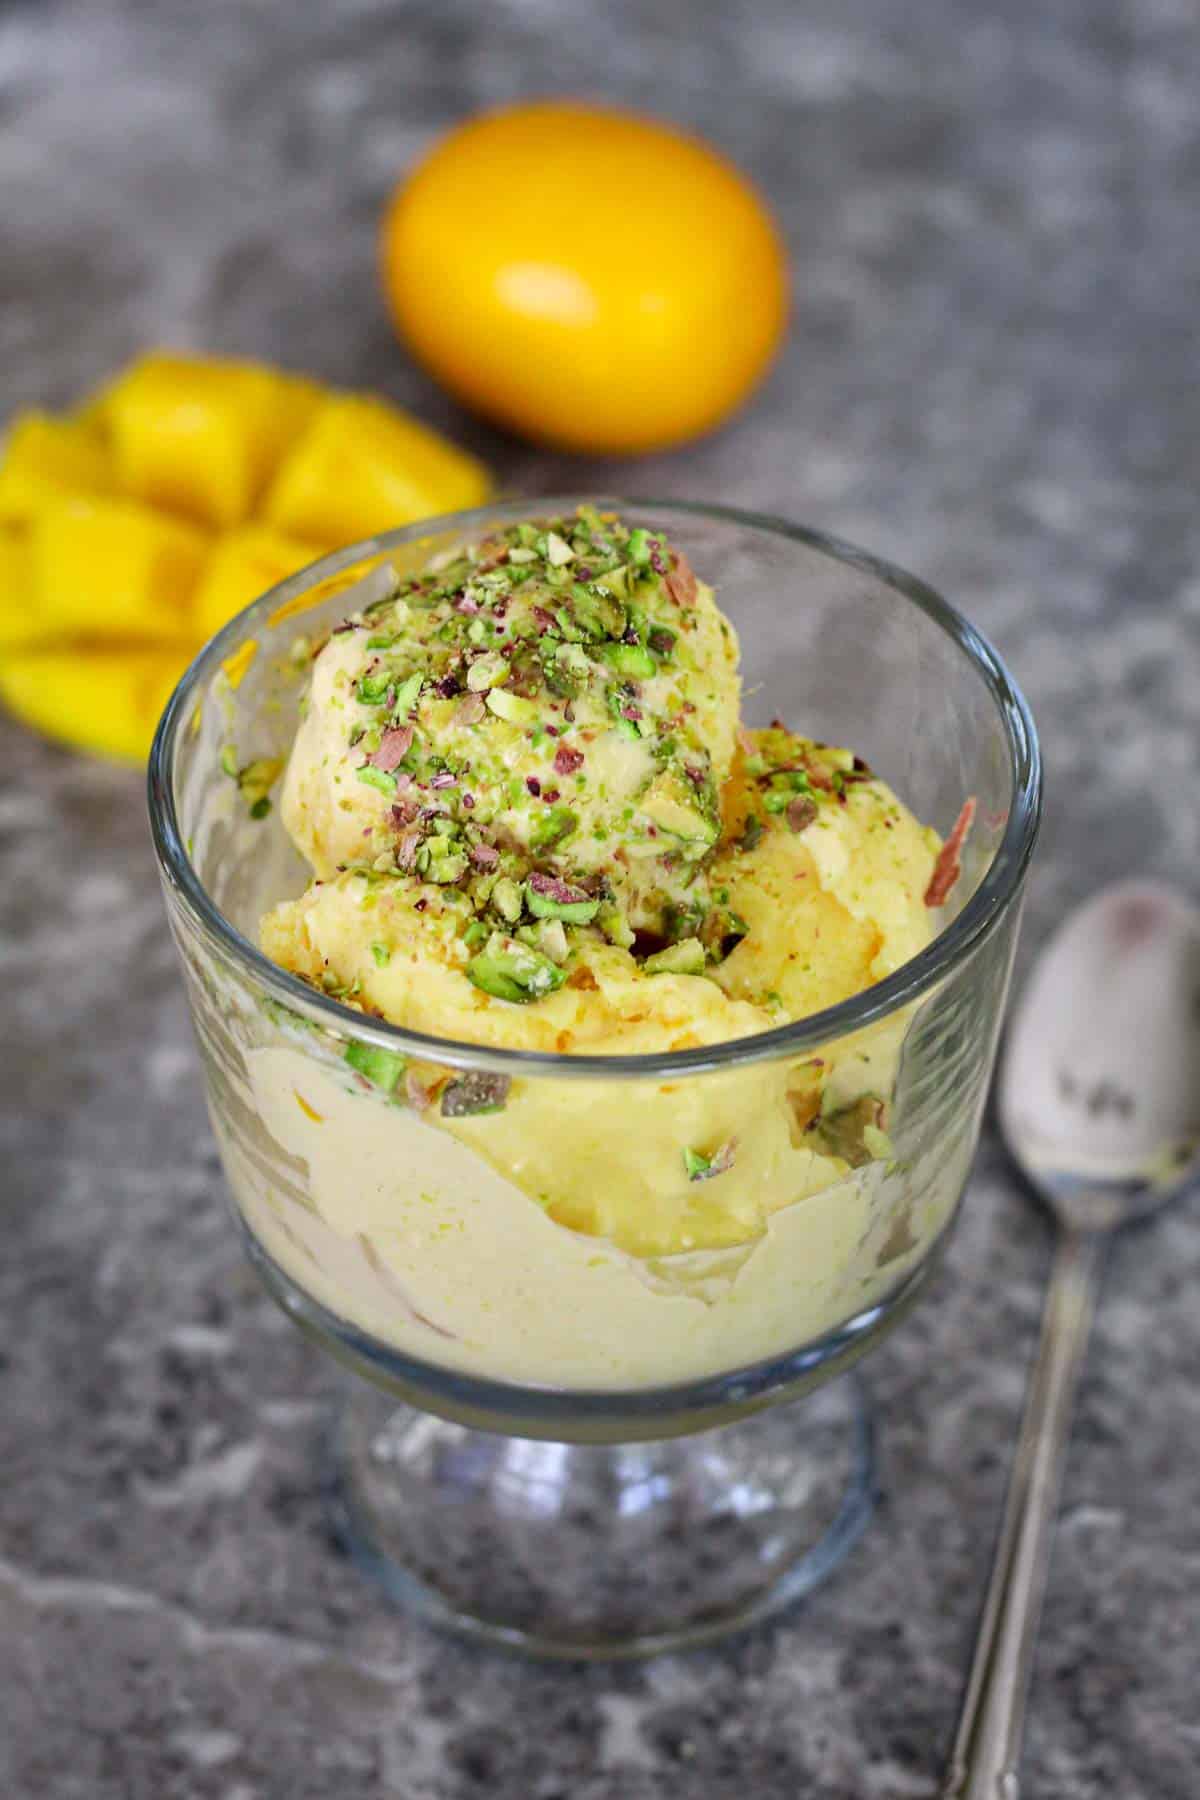 A serving of a yellow ice cream topped with chopped pistachio. In the background, there's a Meye lemon and a half mango cut in cubes.